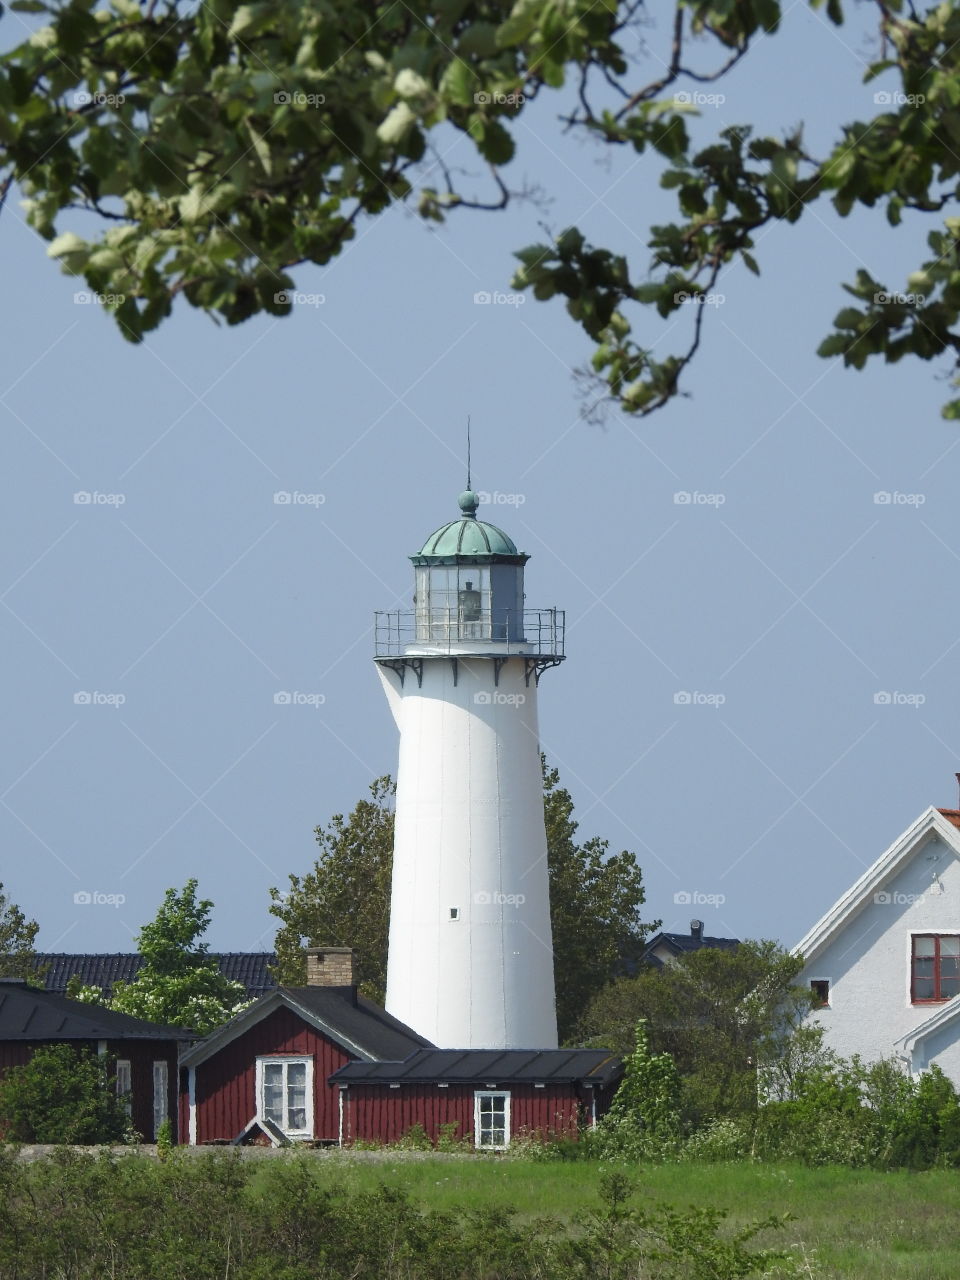 Lighthouse in lush surroundings